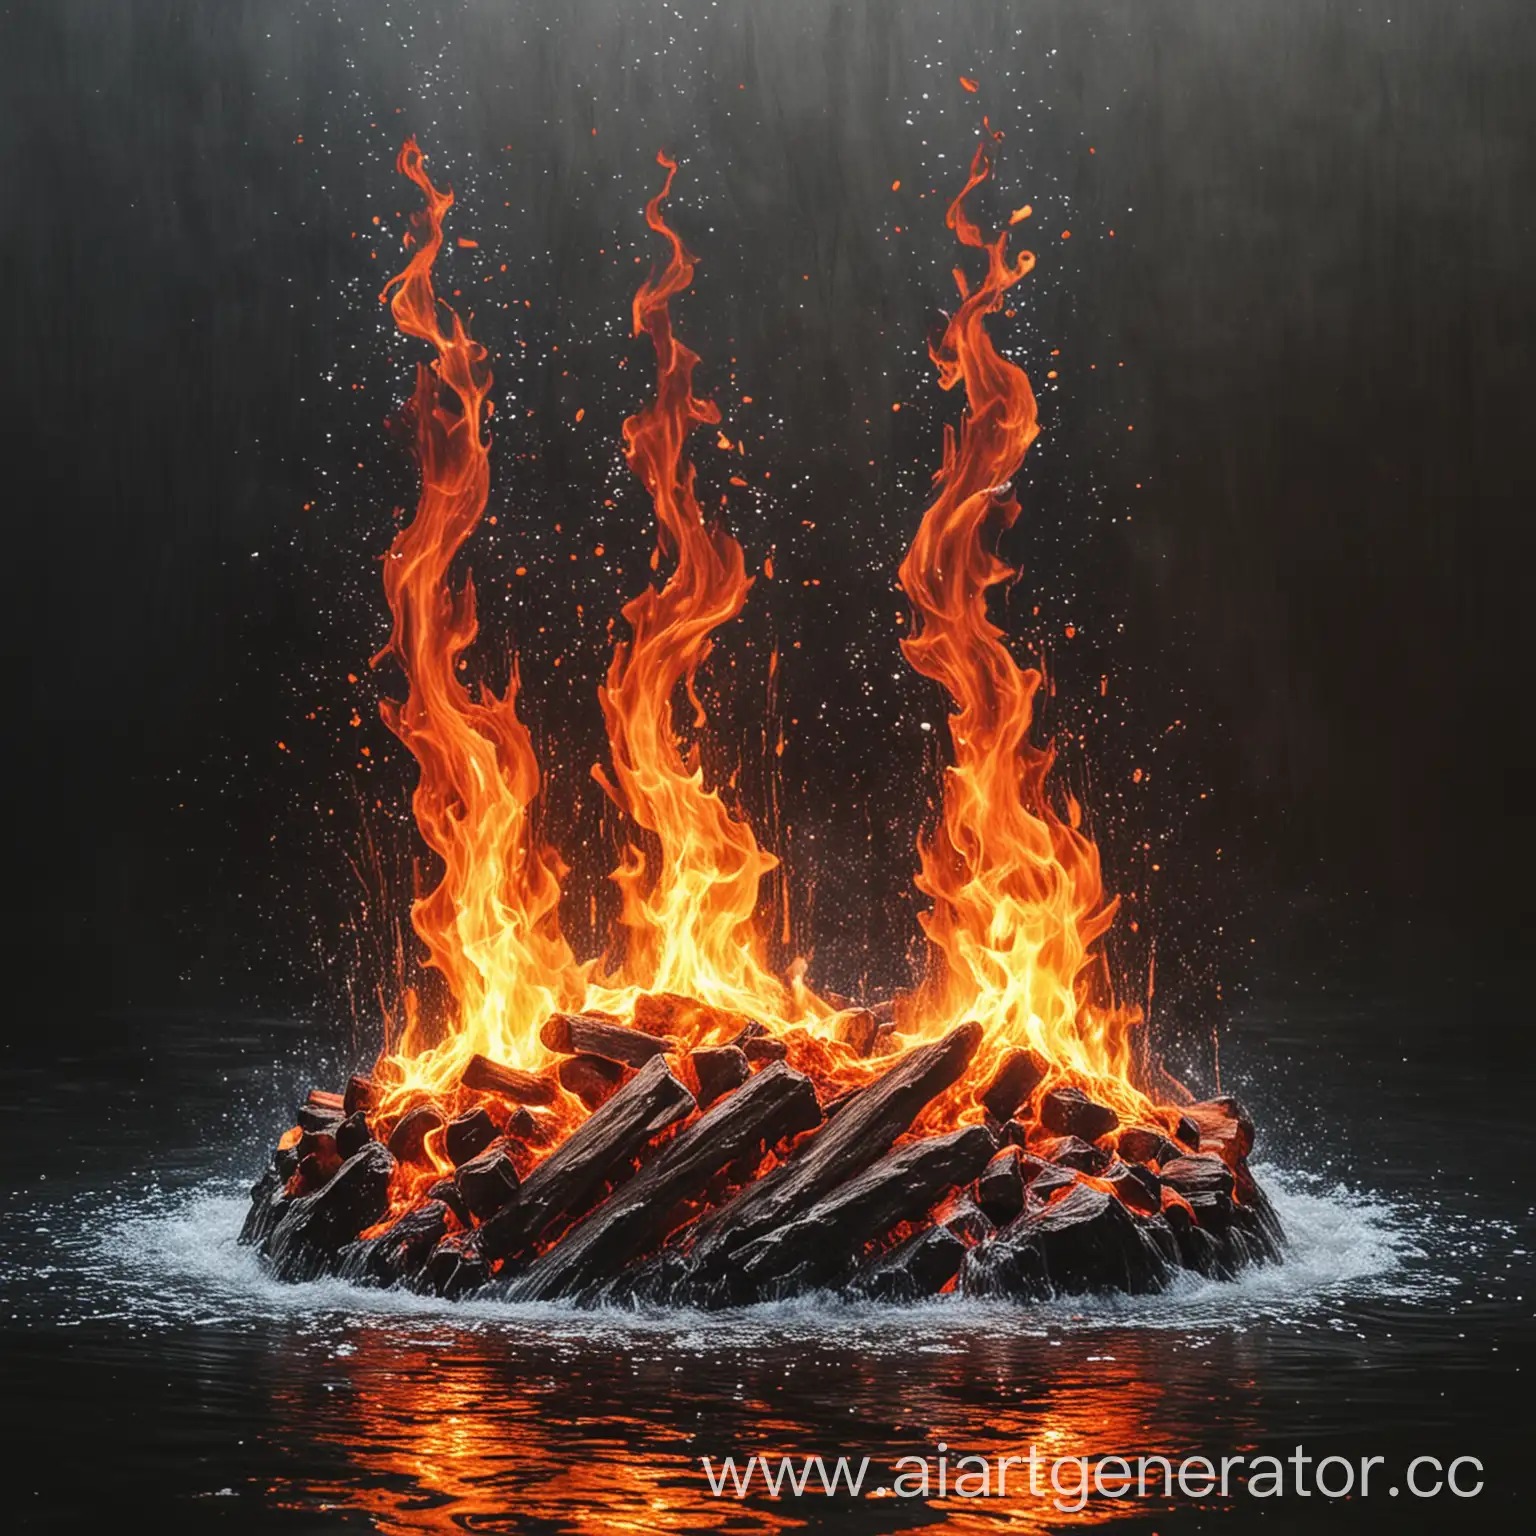 Abstract-Artwork-of-Fire-and-Water-Interplay